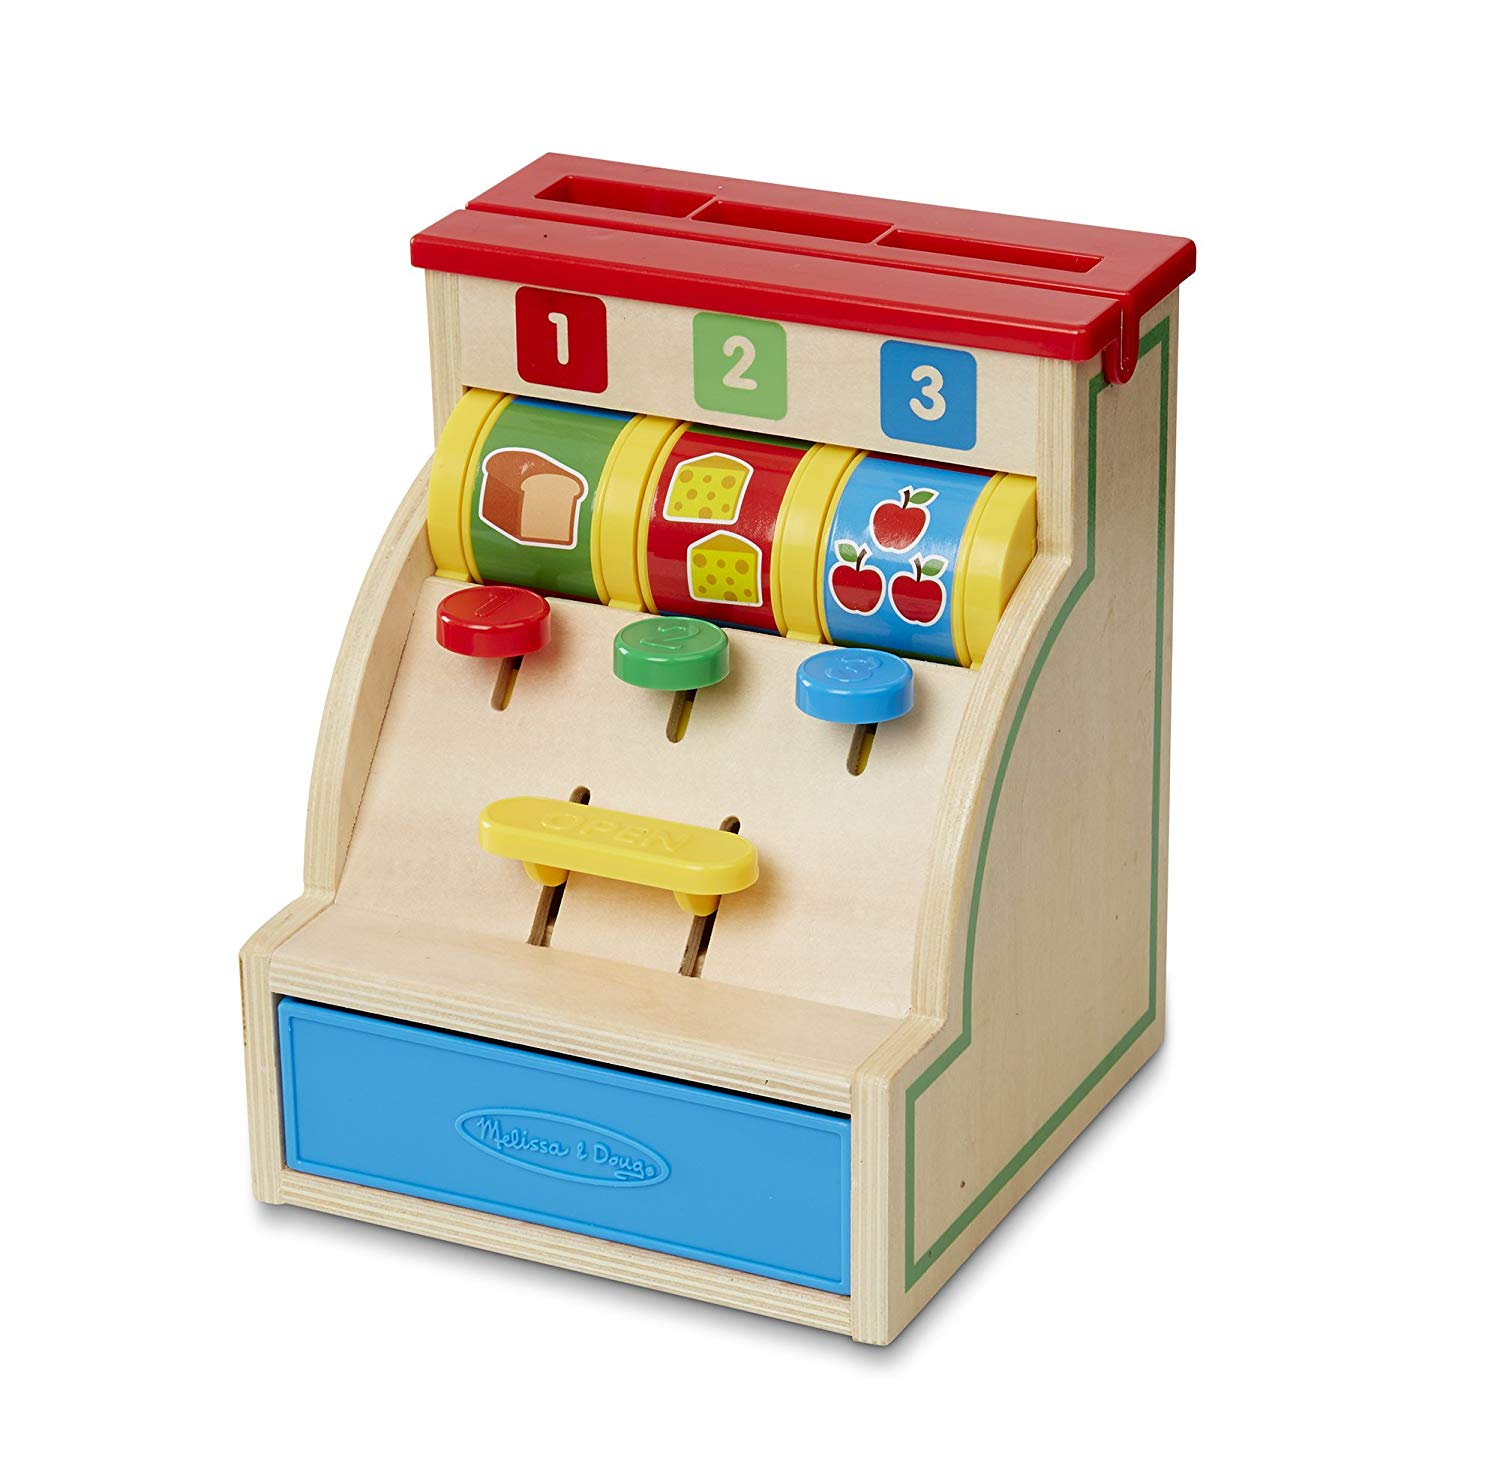 Melissa & Doug Wooden 13378 Cash Register With 3 Game Coin And Credit Card/